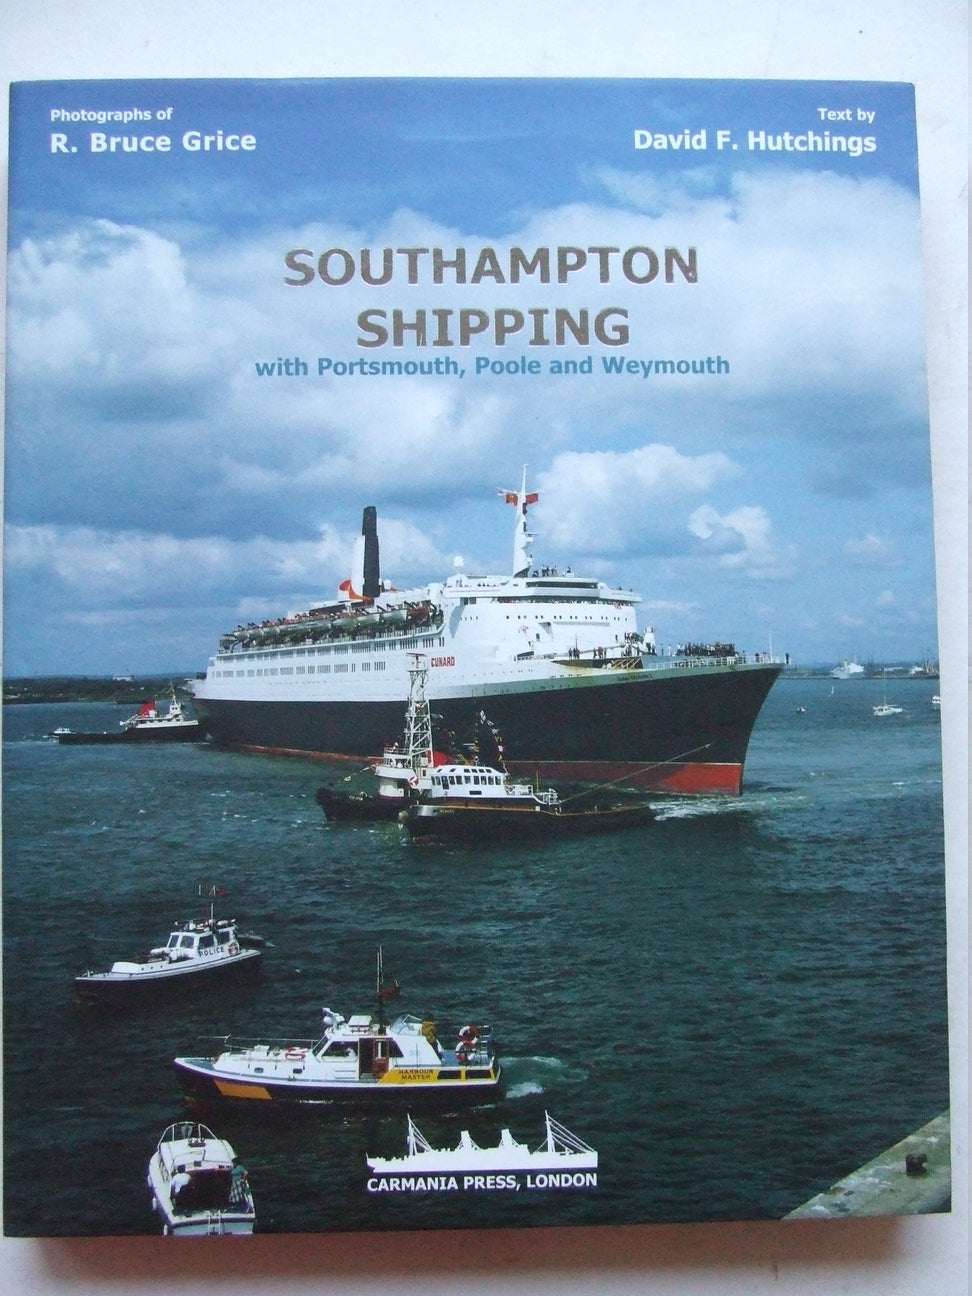 Southampton Shipping, with Portsmouth, Poole and Weymouth